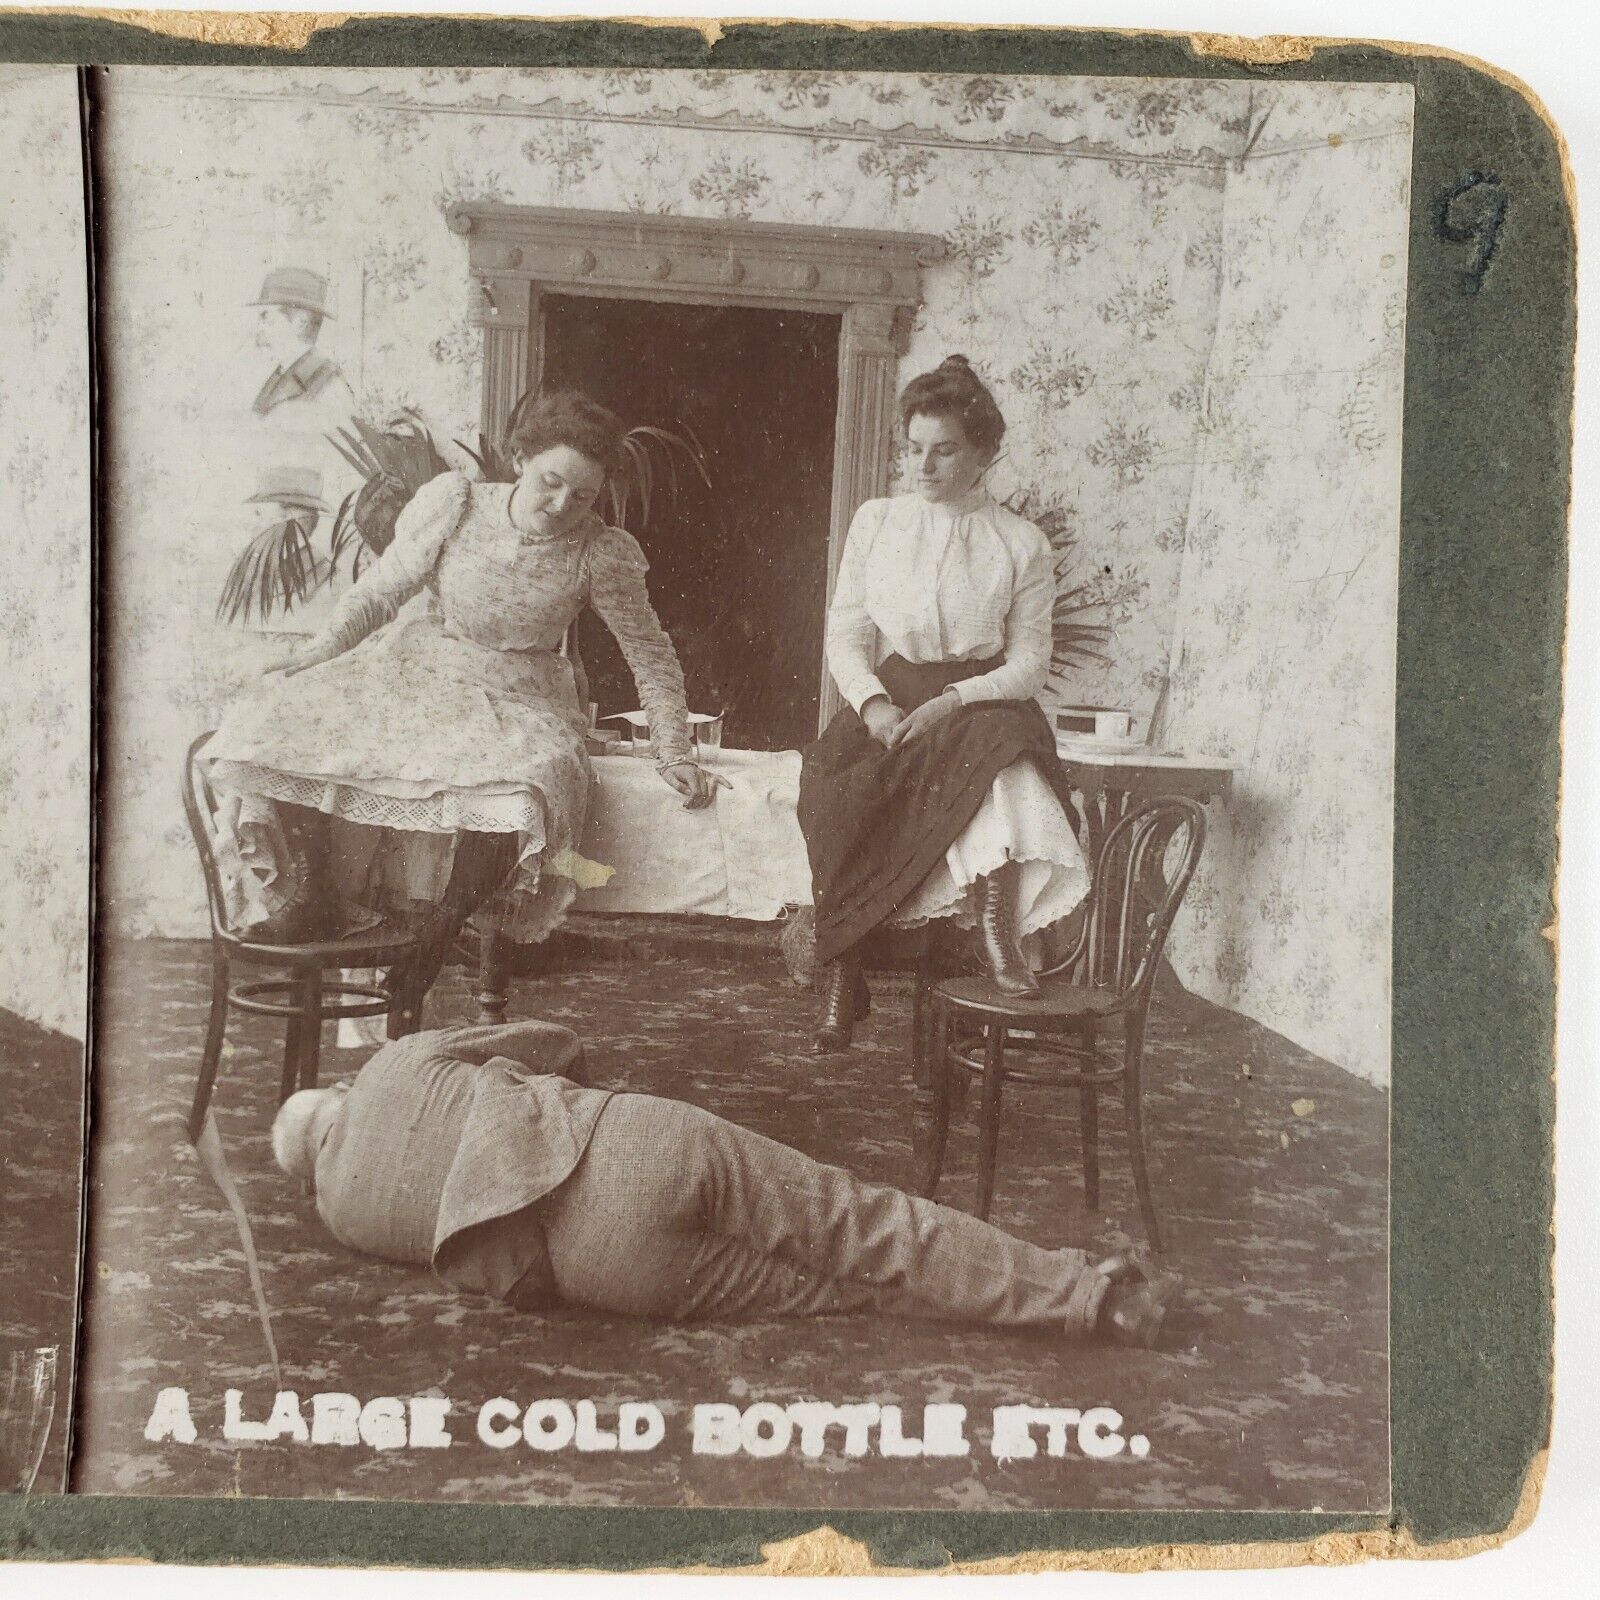 Drunk Man Collapsed on Floor Stereoview c1900 Large Cold Bottle Women Card B2057